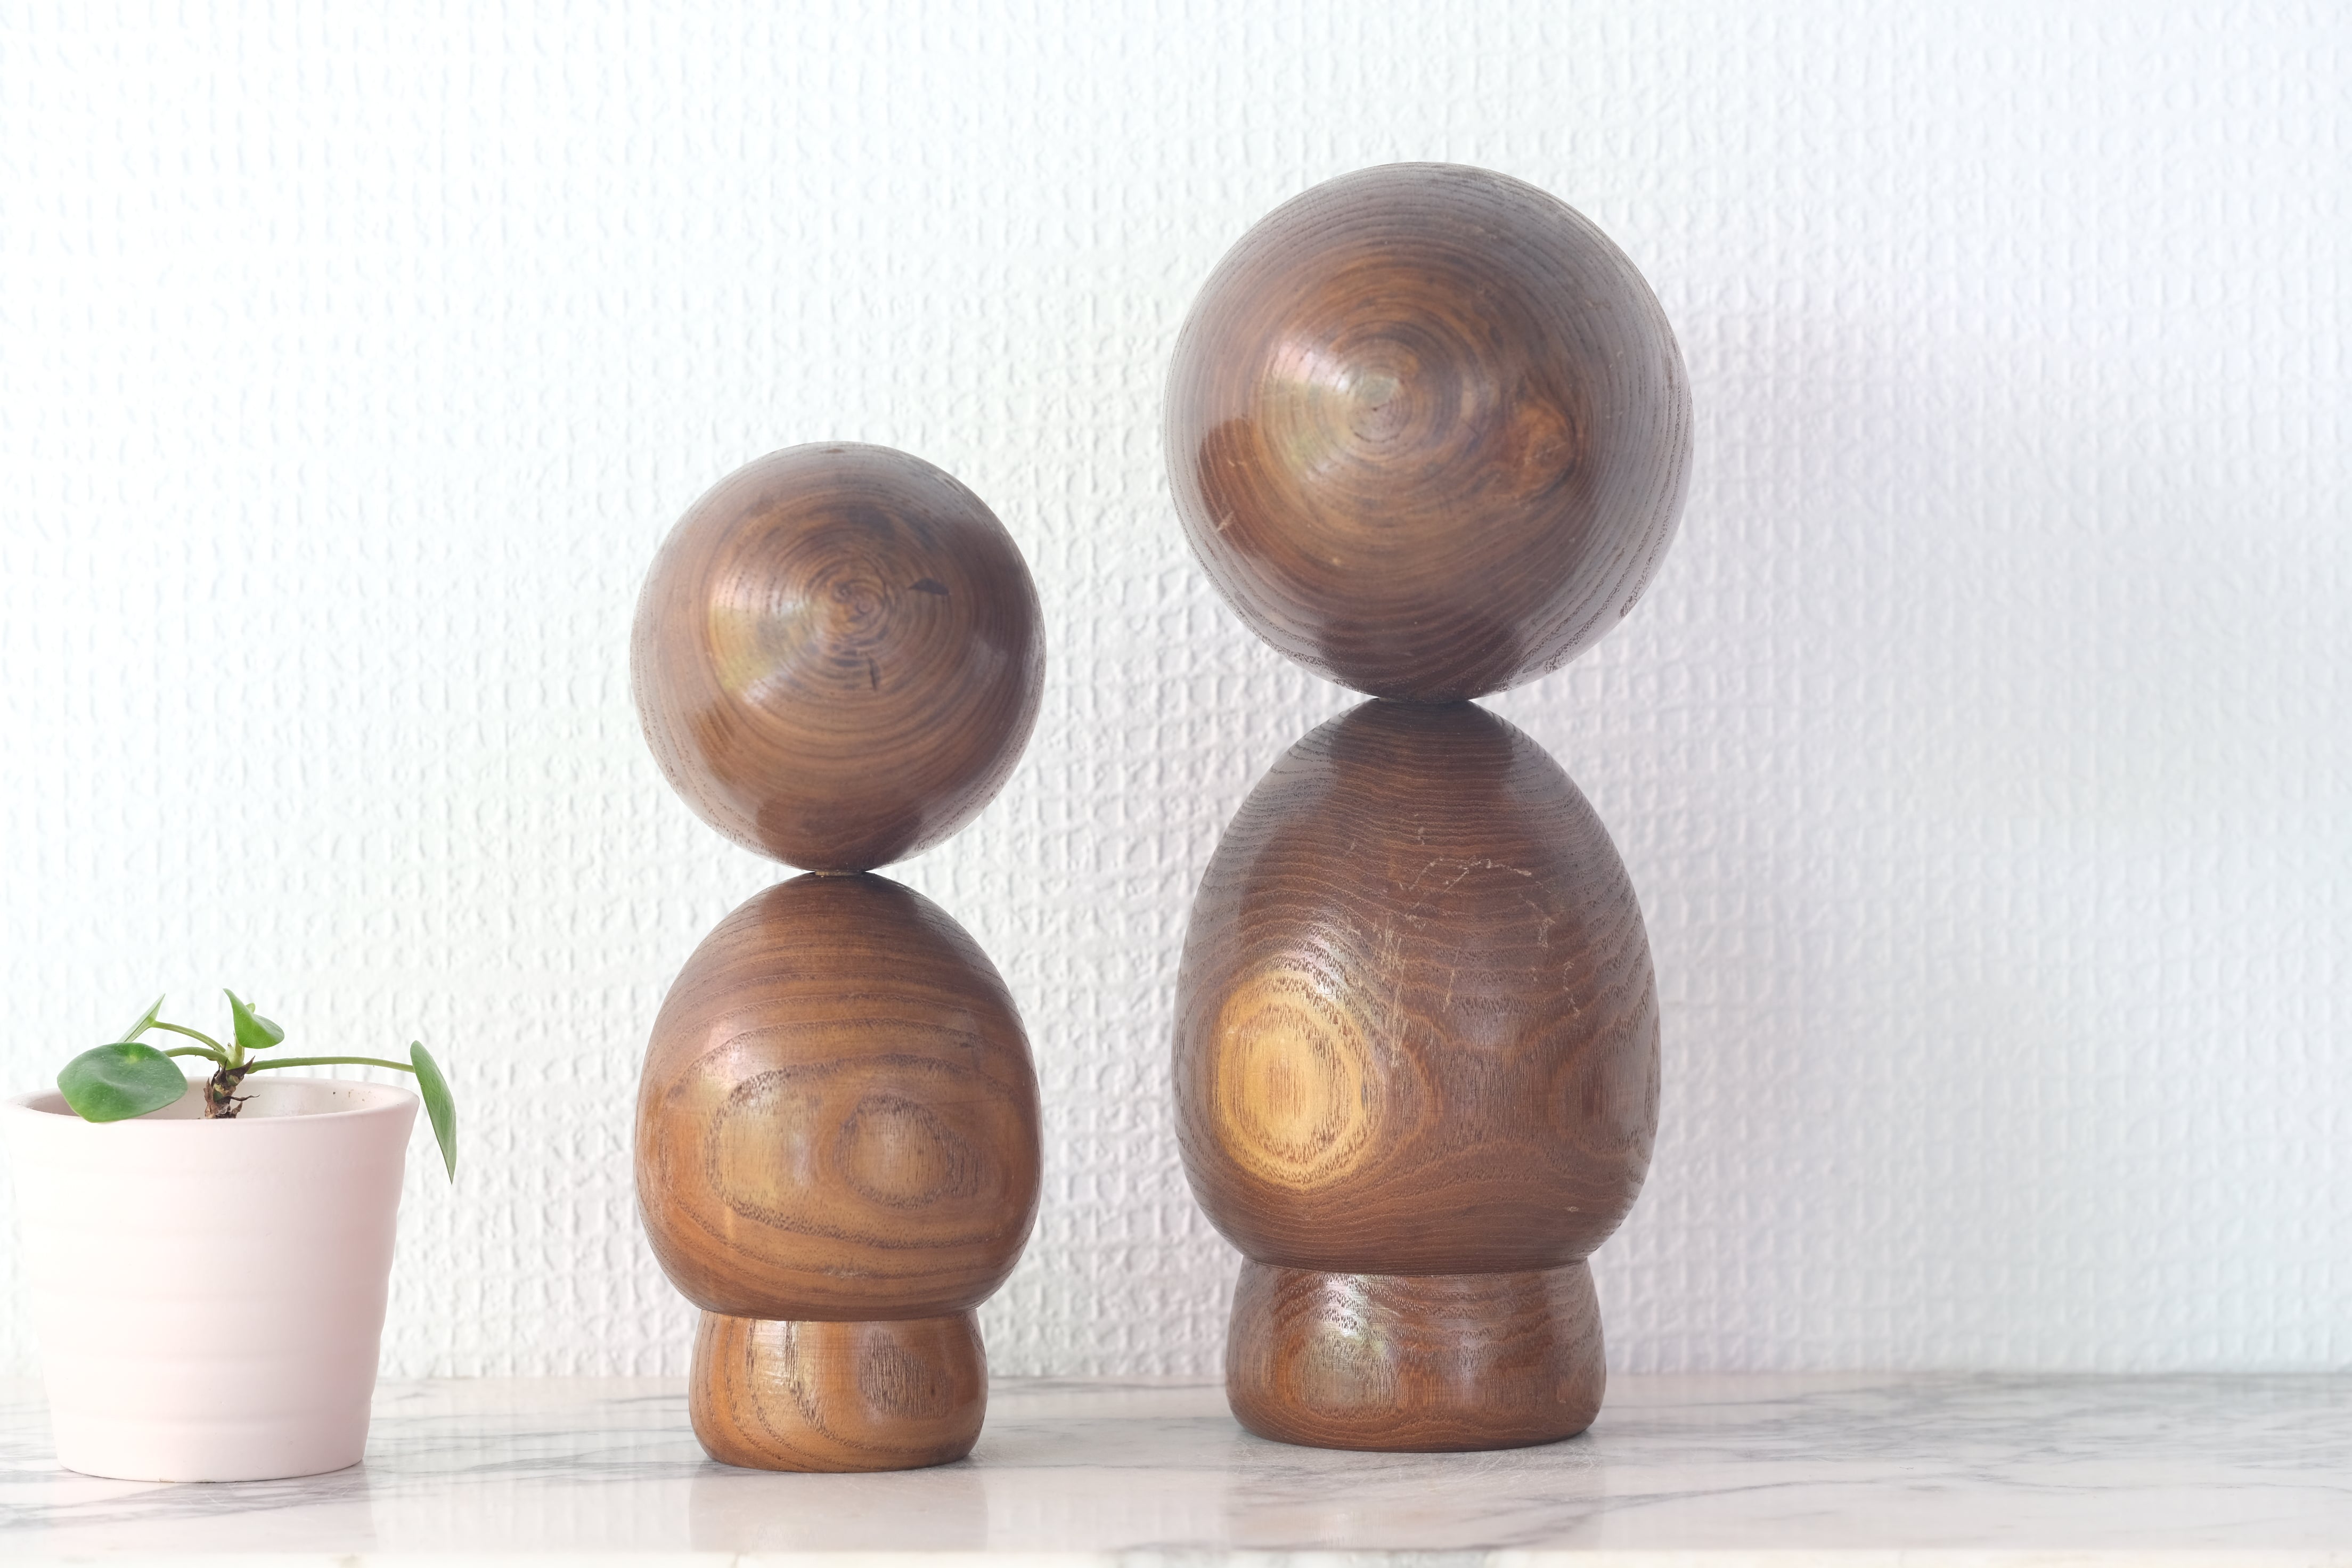 Exclusive Pair of Vintage Creative Kokeshi by Hideo Ishihara (1925-1999) | 16 cm and 20,5 cm